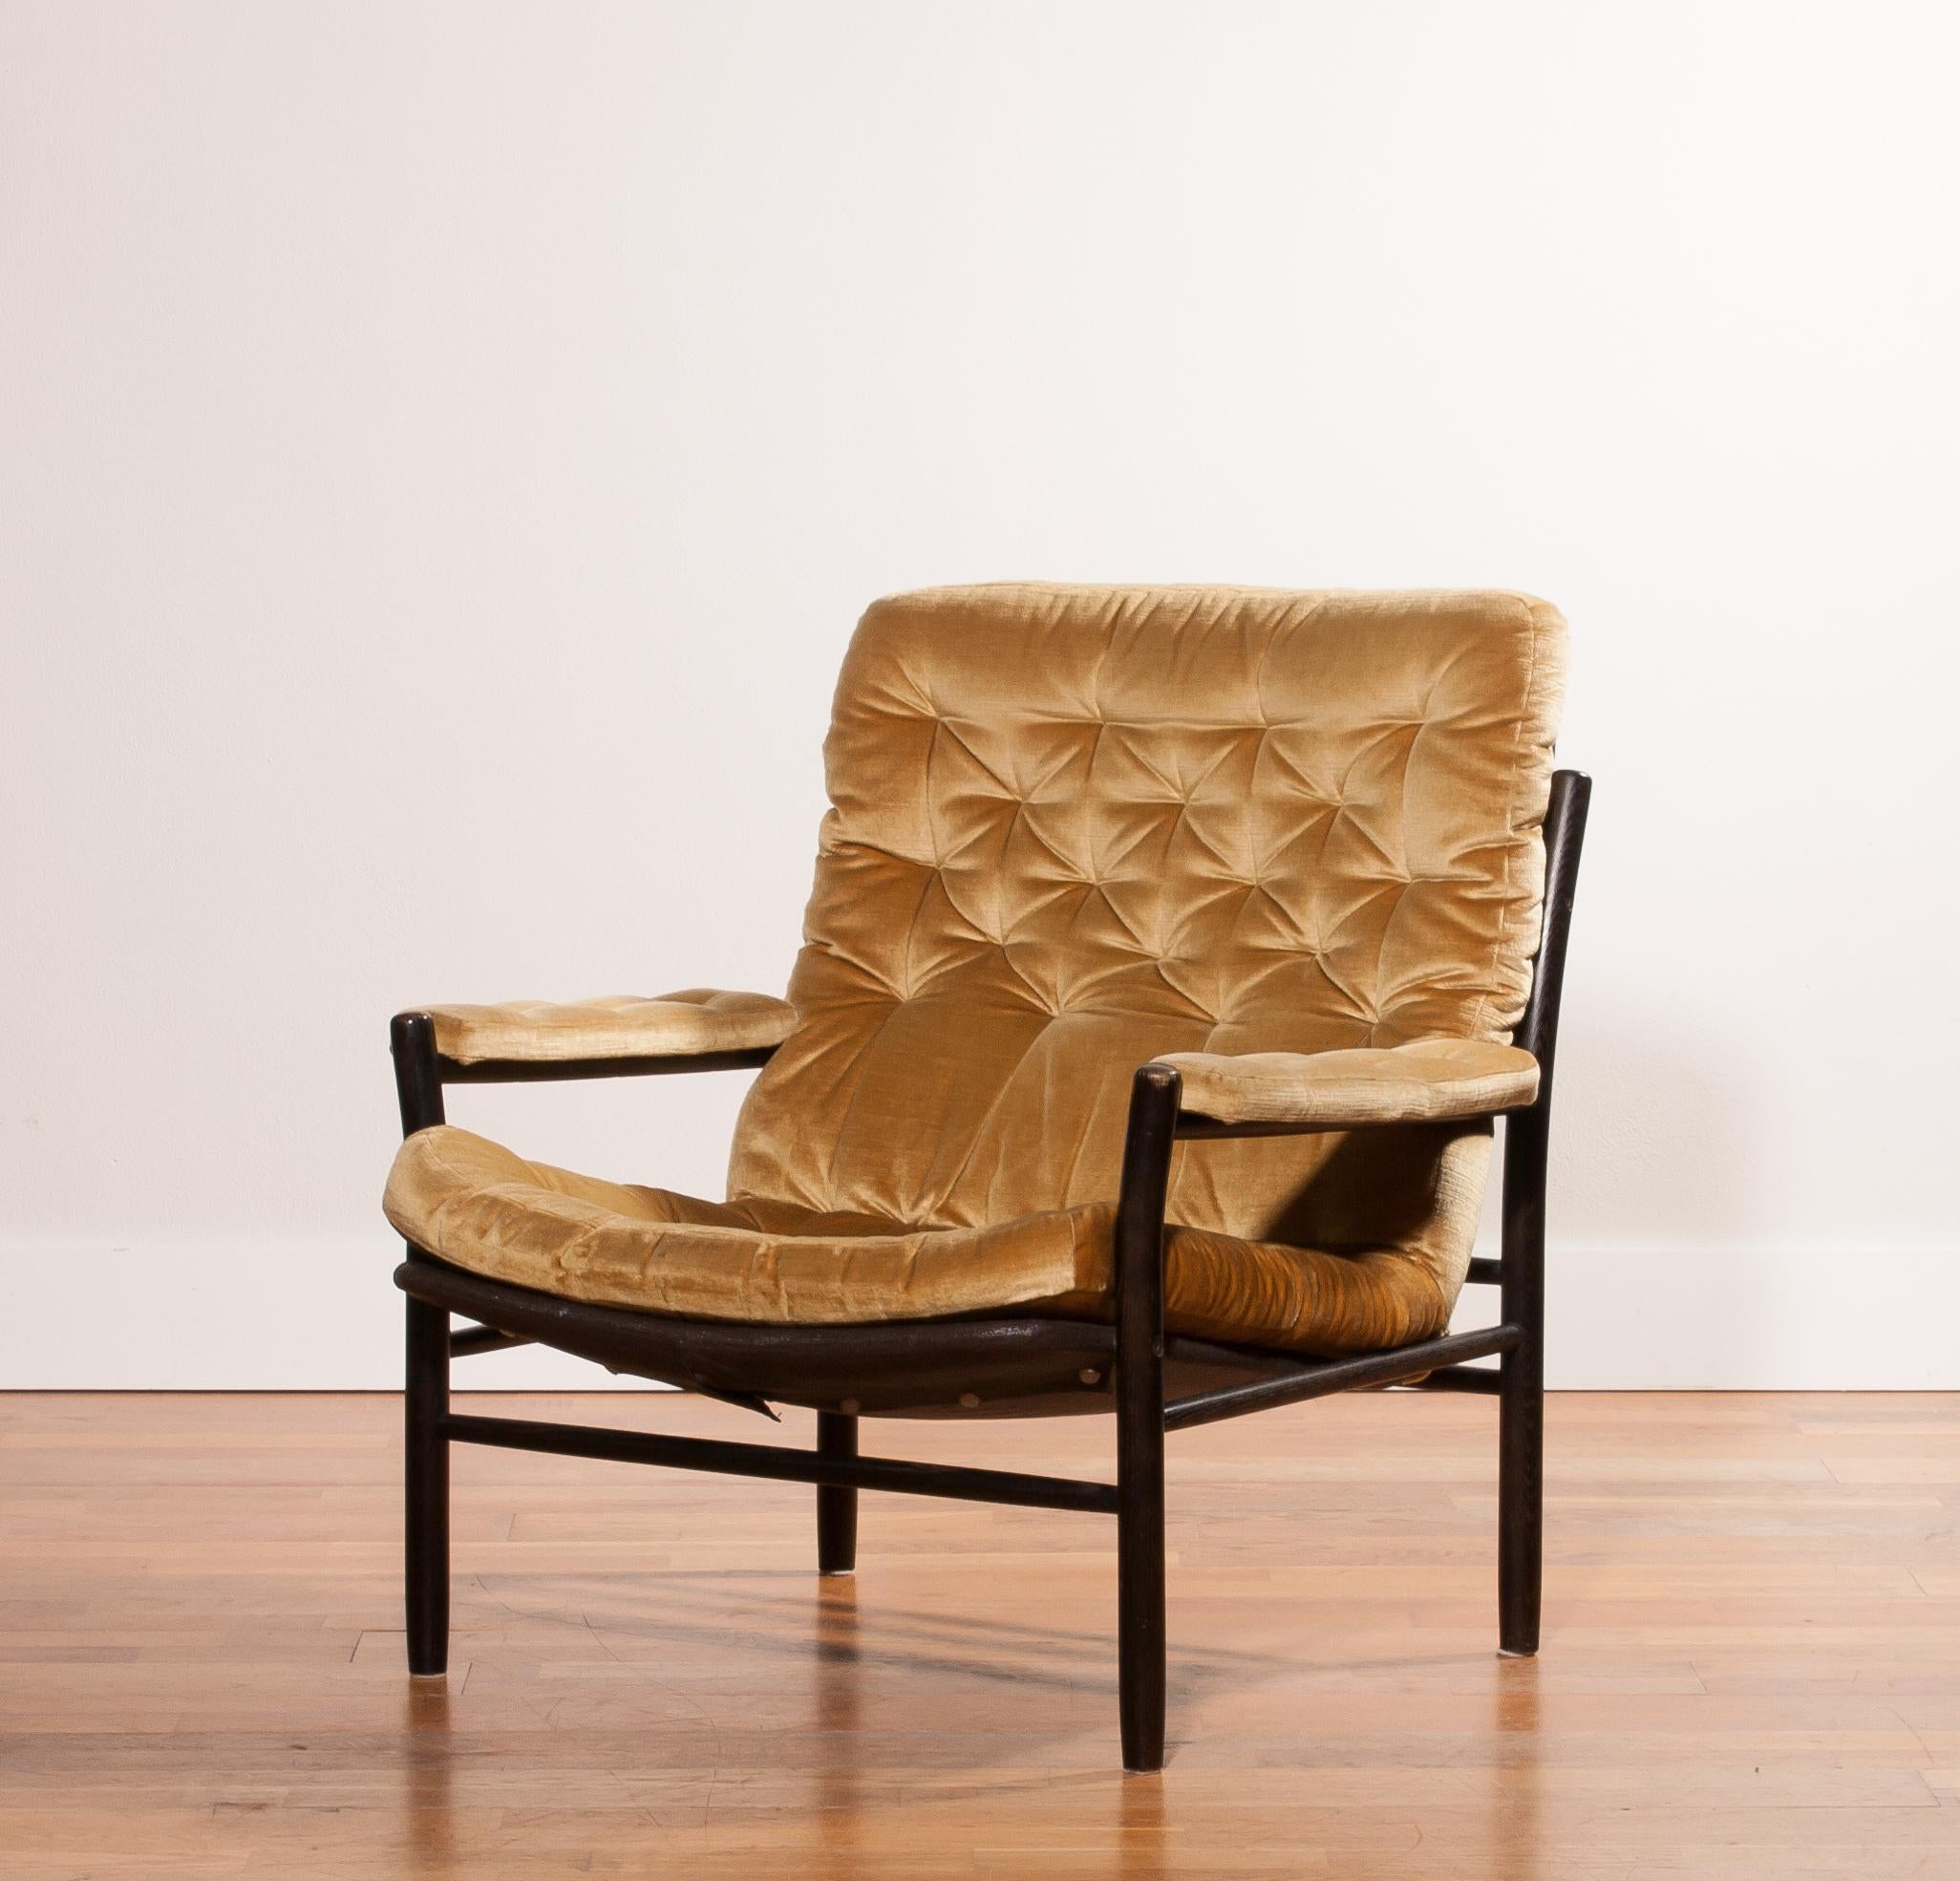 This chair in gold-yellow velours with a black wooden frame was designed by Kenneth Bergenblad and manufactured by DUX, Sweden.
It is in a very nice condition.
Period 1970s.
Dimensions: H 83 cm, W 80 cm, D 69 cm, Sh 37 cm.